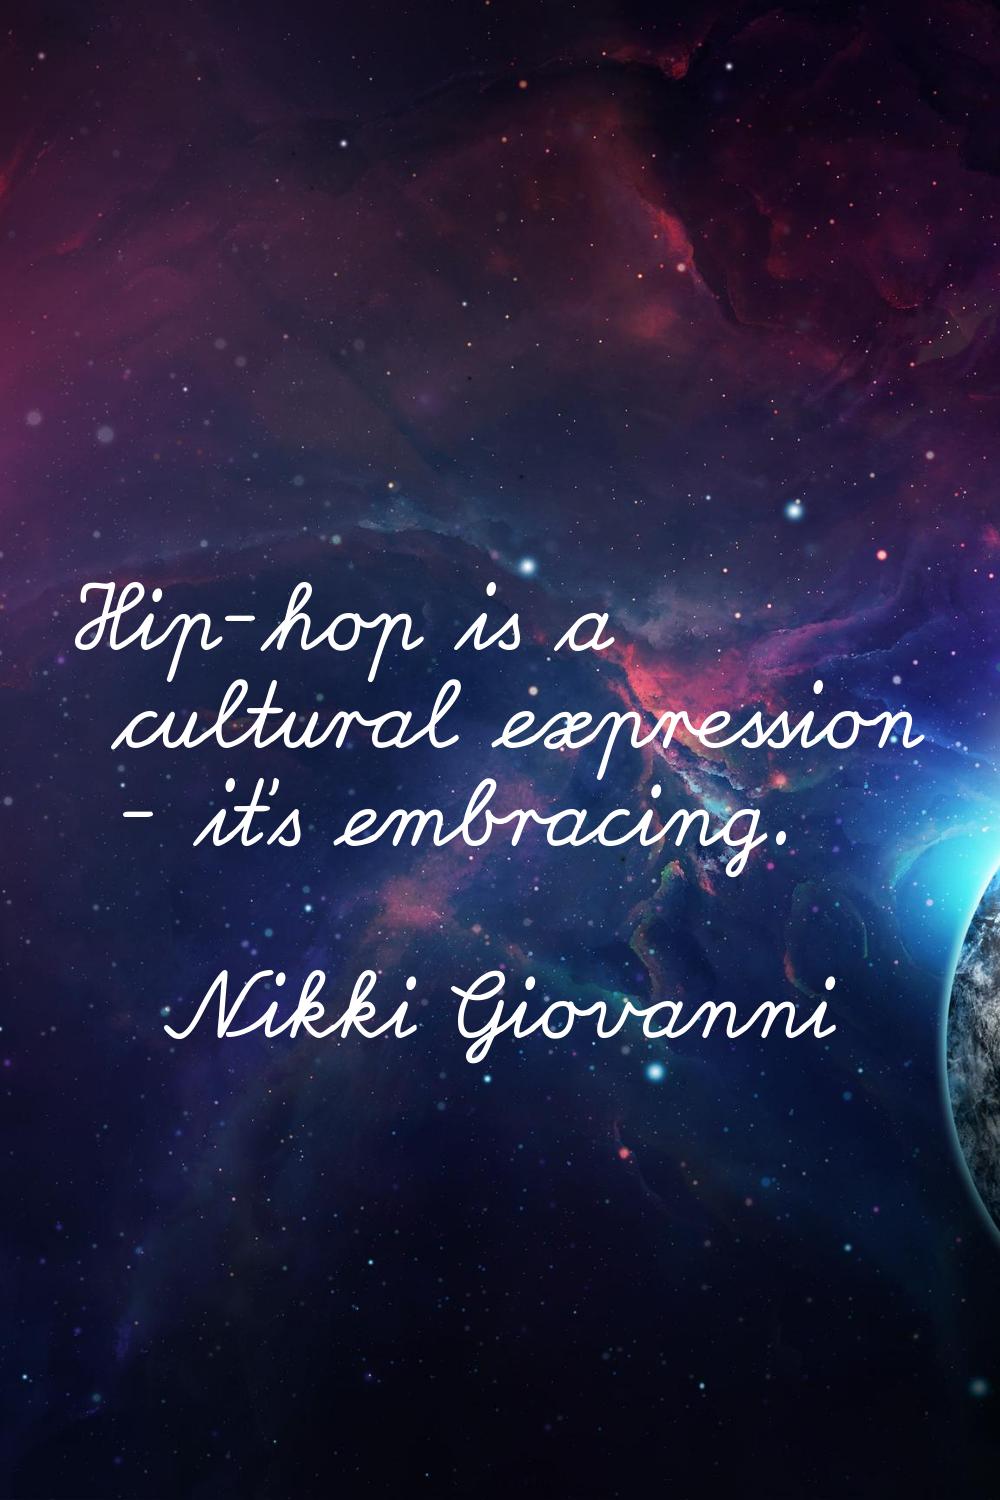 Hip-hop is a cultural expression - it's embracing.